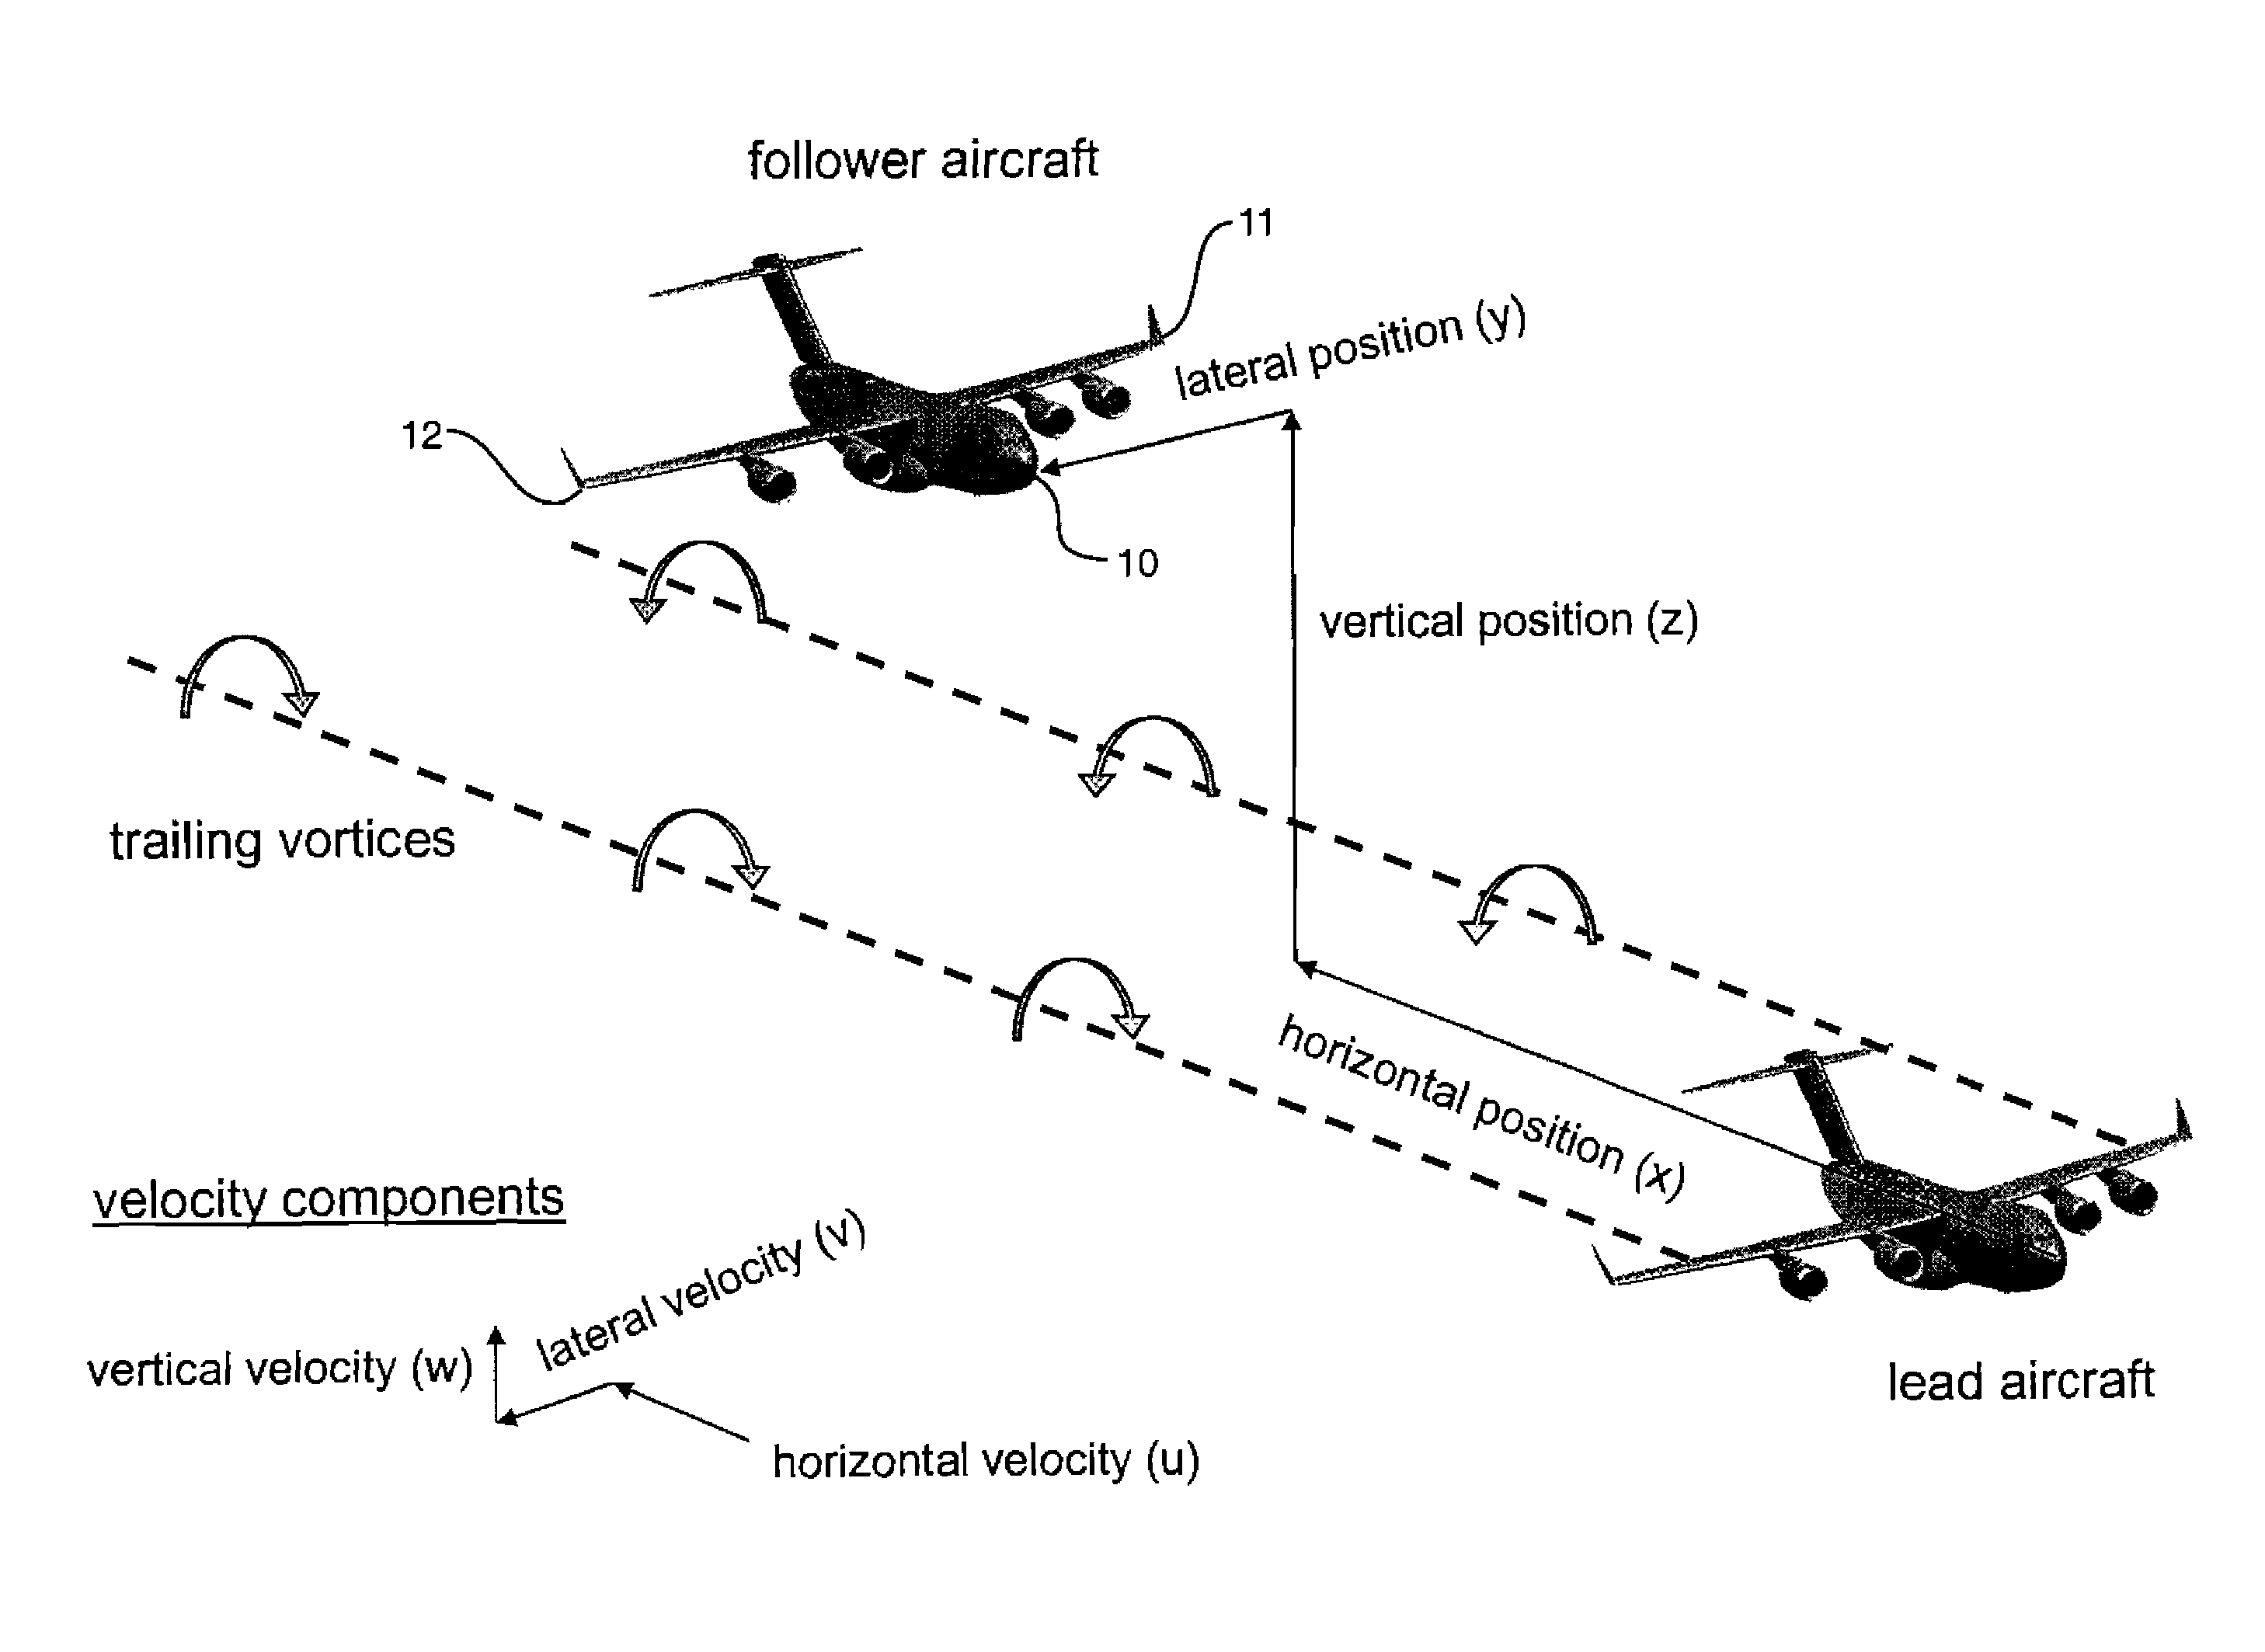 Close formation flight positioning system using air data measurements